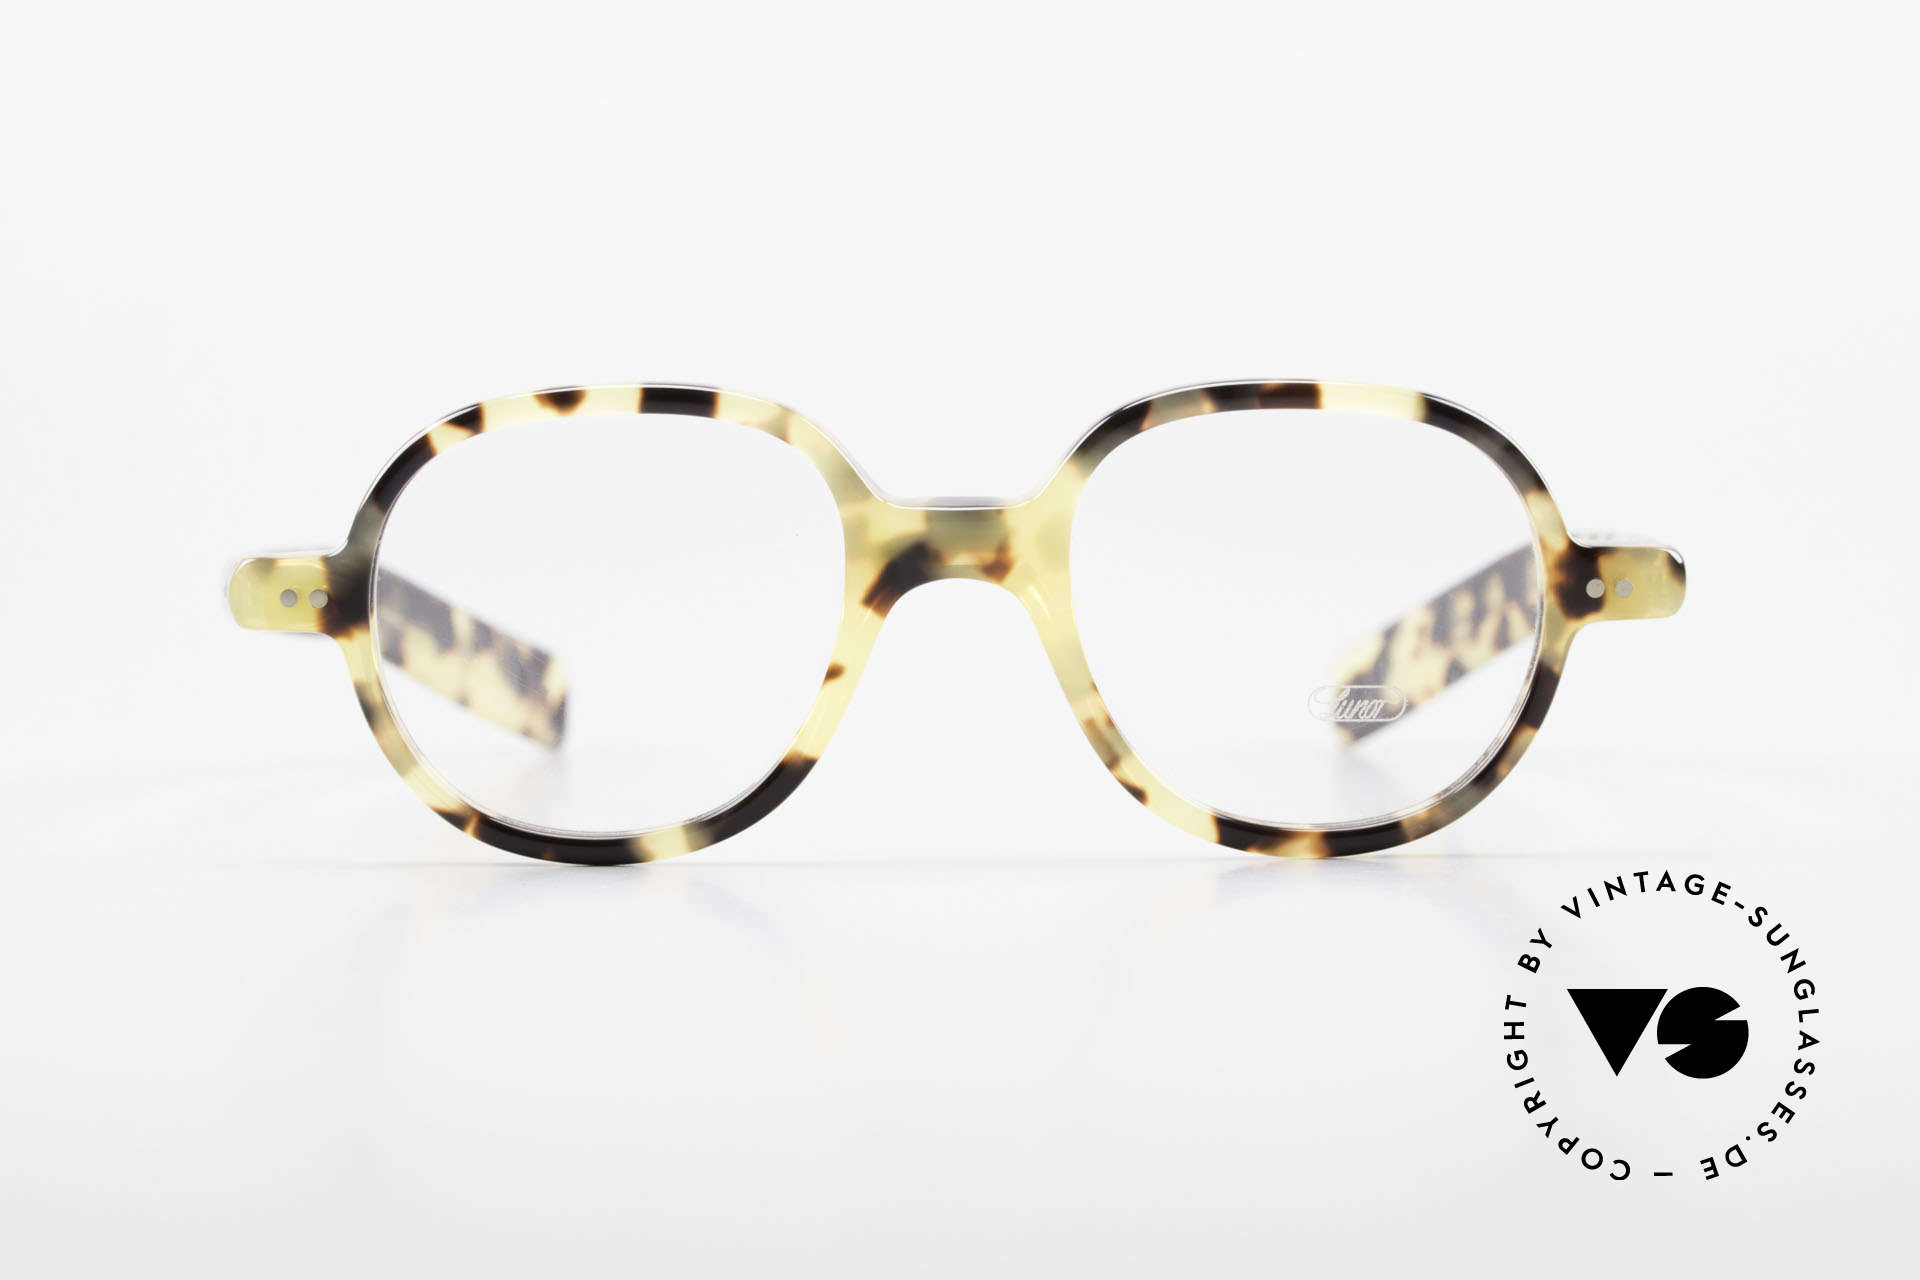 Lunor A50 Round Lunor Glasses Acetate, riveted hinges; cut precise to the tenth of a millimeter, Made for Men and Women